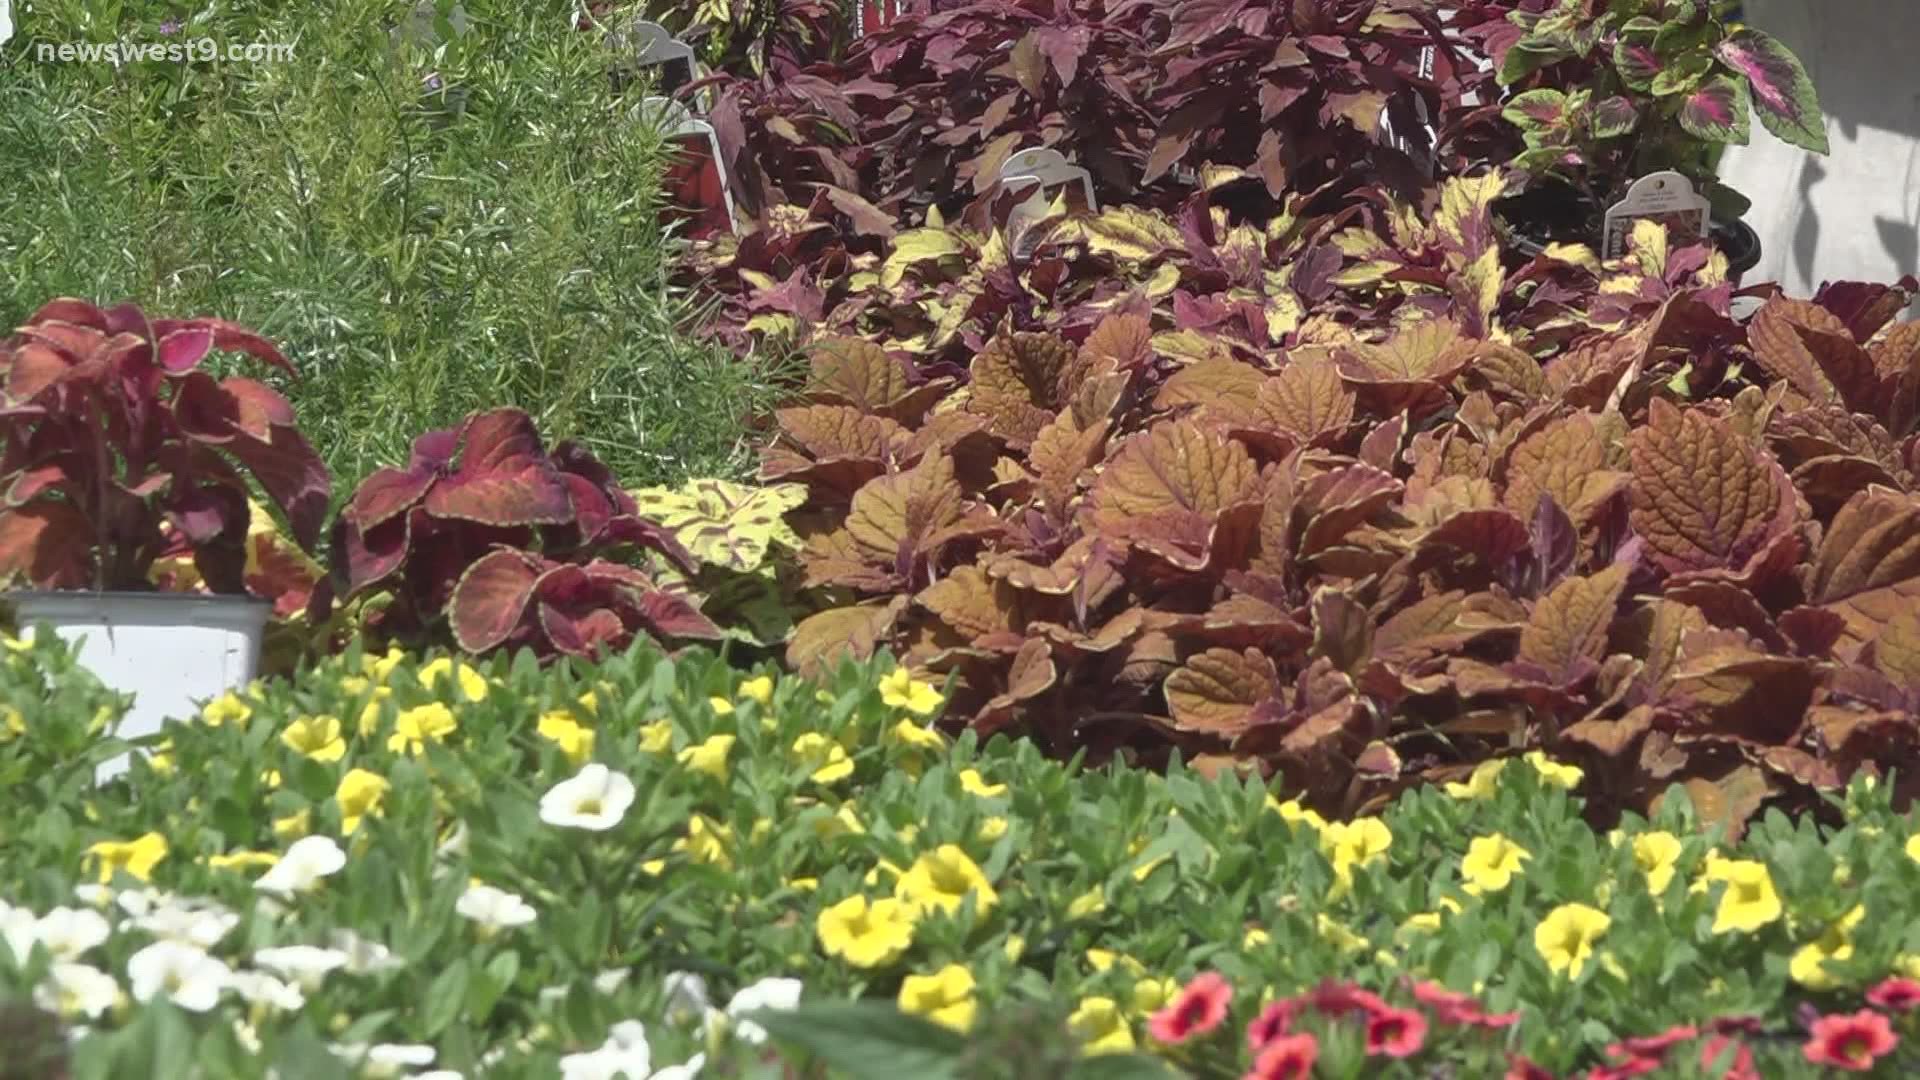 Plant owners and nature experts are expressing what plant life will be looking like this Spring after cold temperatures affected all sorts of plants.